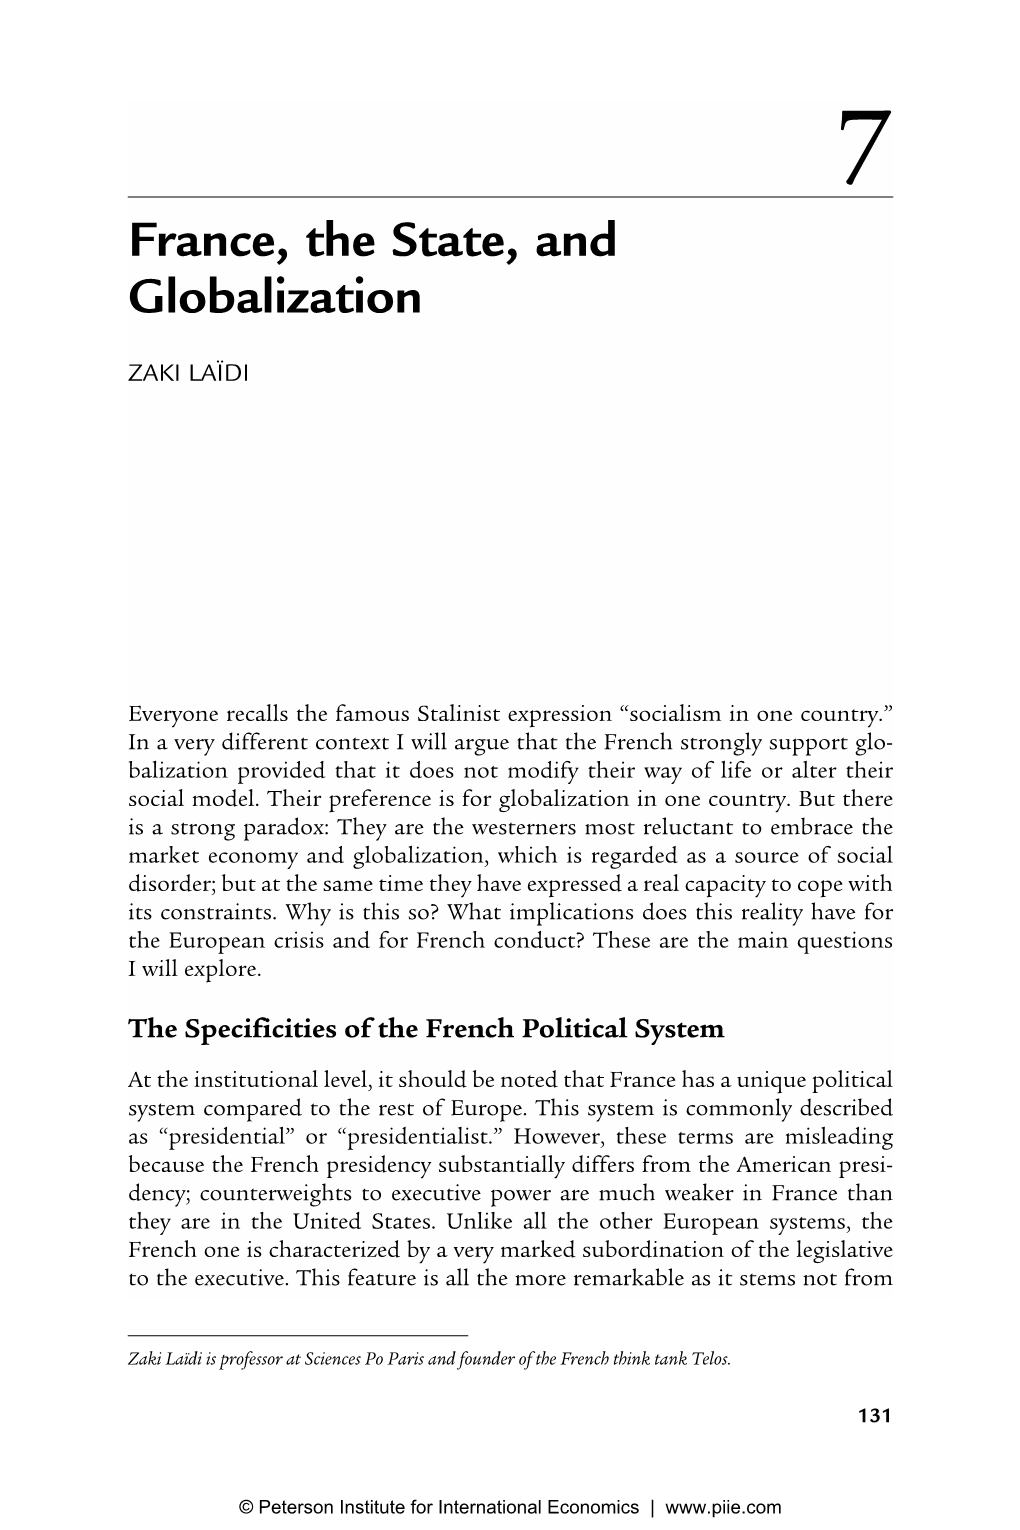 France, the State, and Globalization